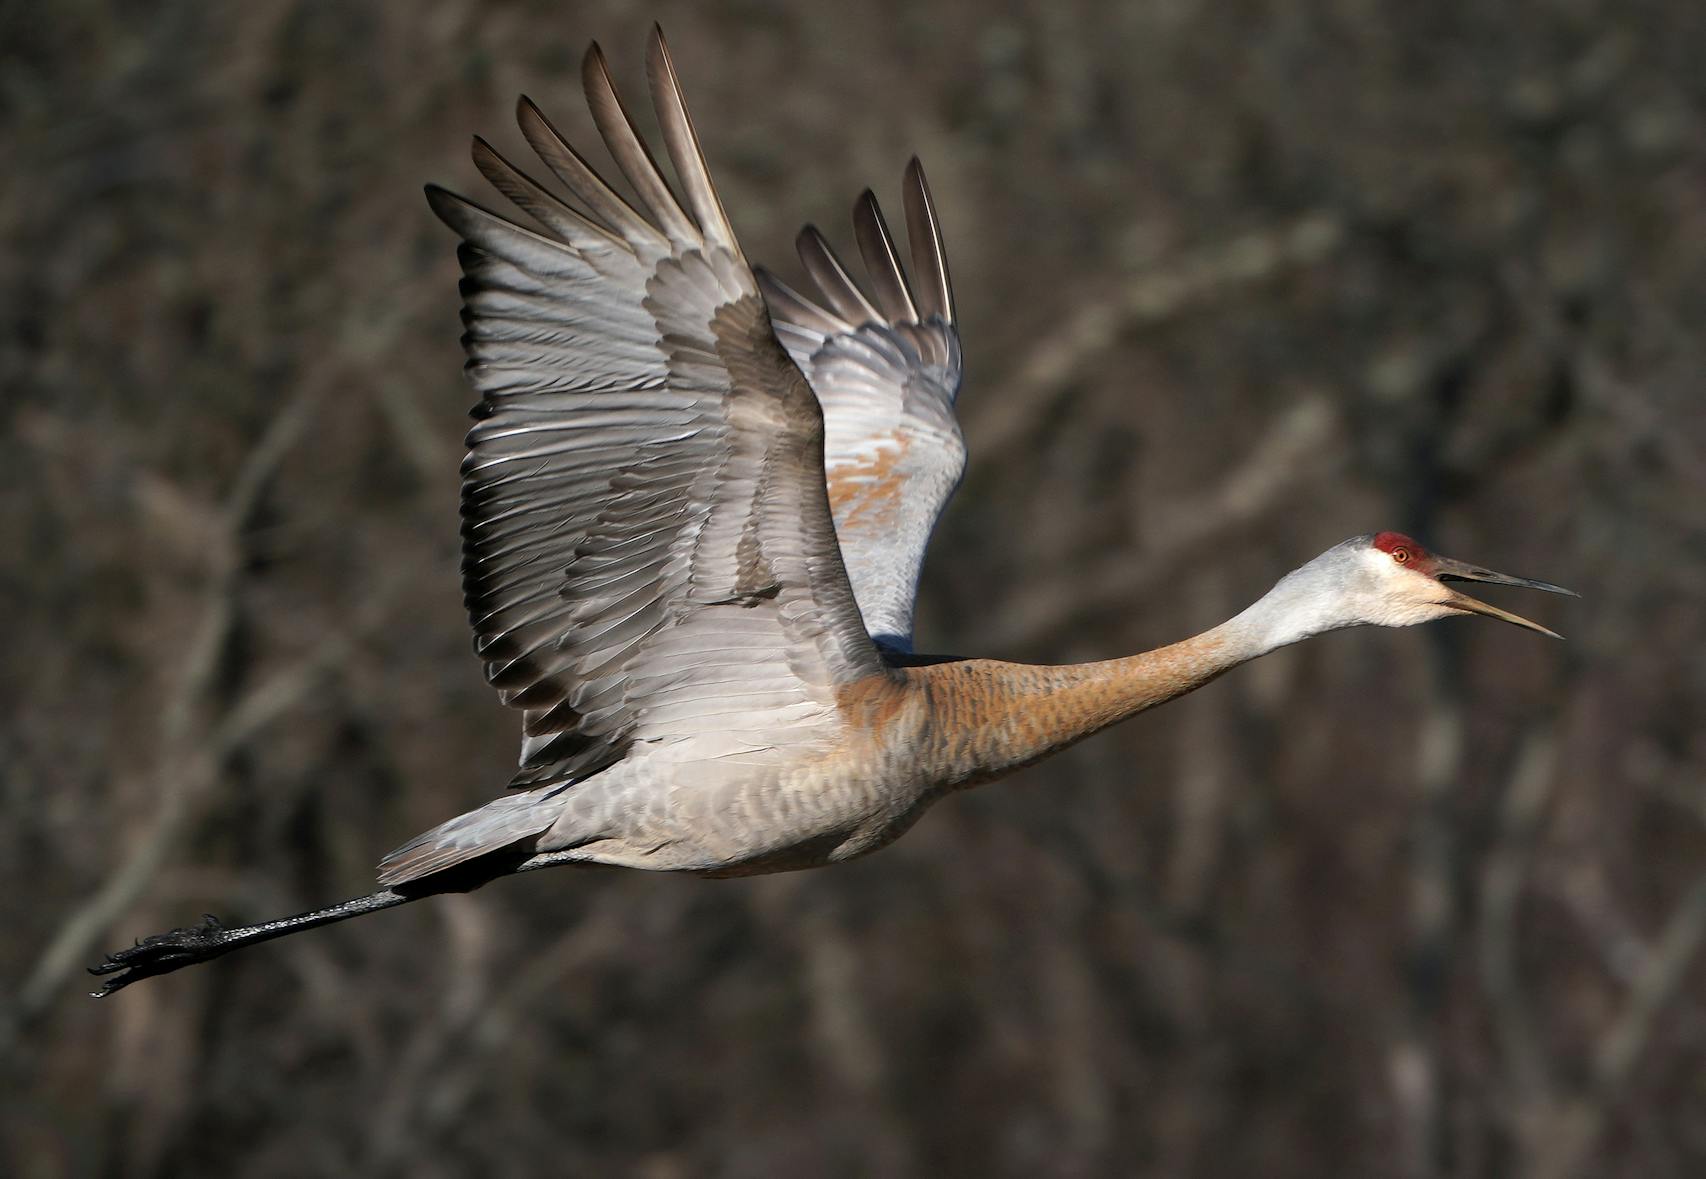 With a loud rattling bugle call in flight, a sandhill crane flew over the St. Croix River.